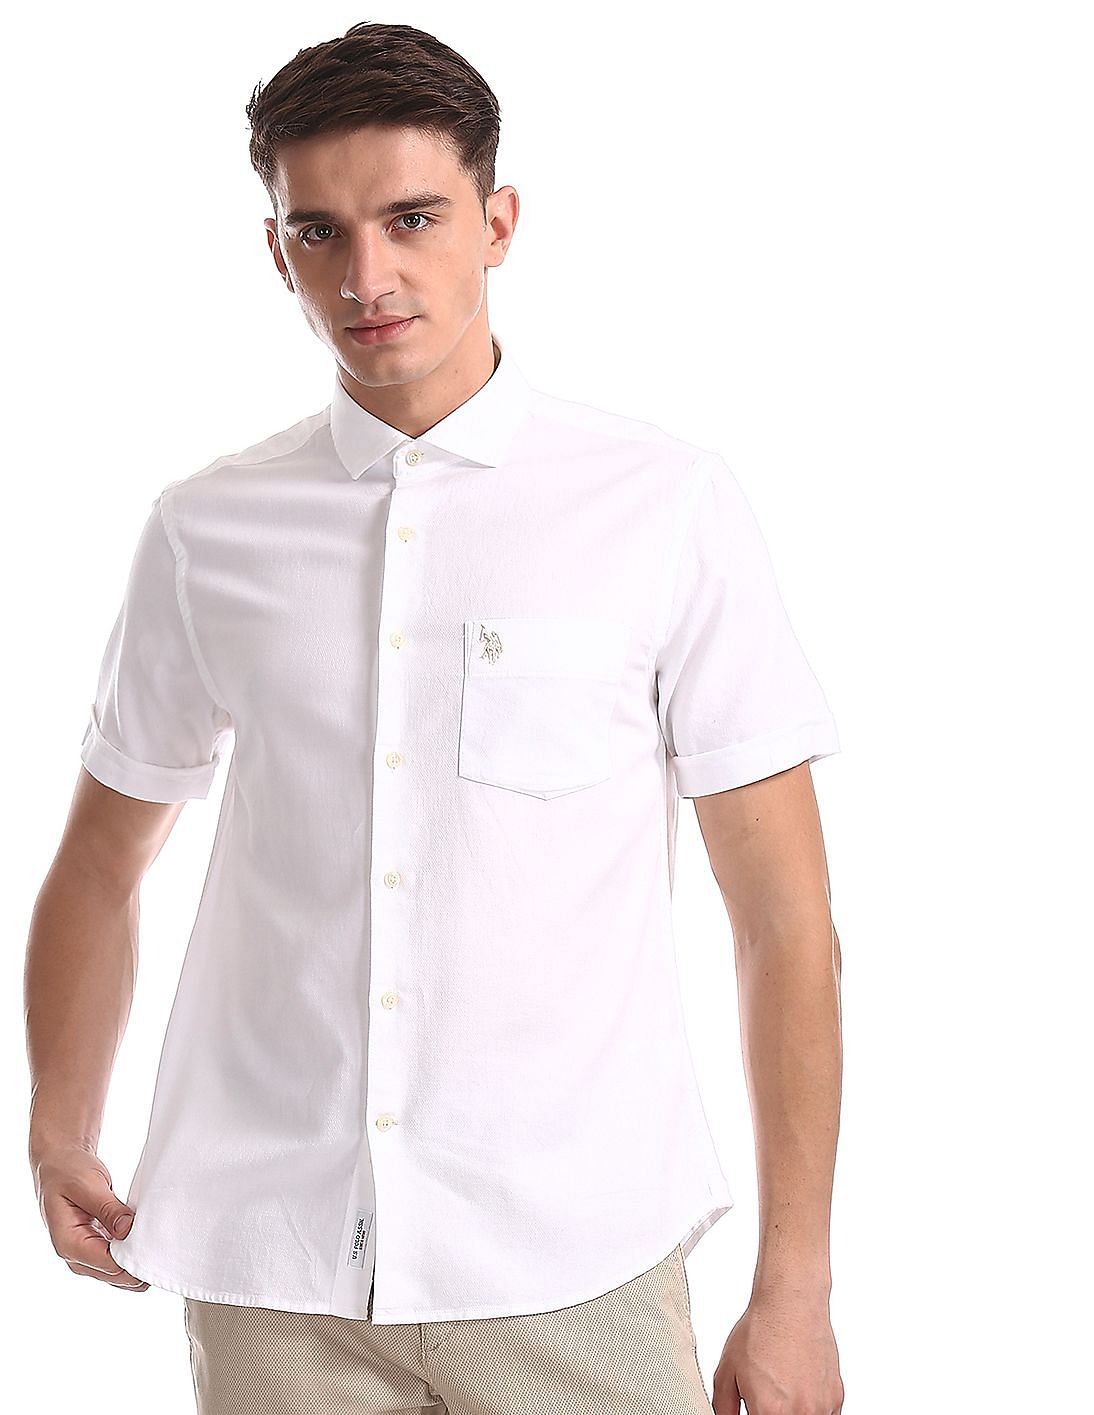 Buy Men White Cutaway Collar Patterned Shirt online at NNNOW.com